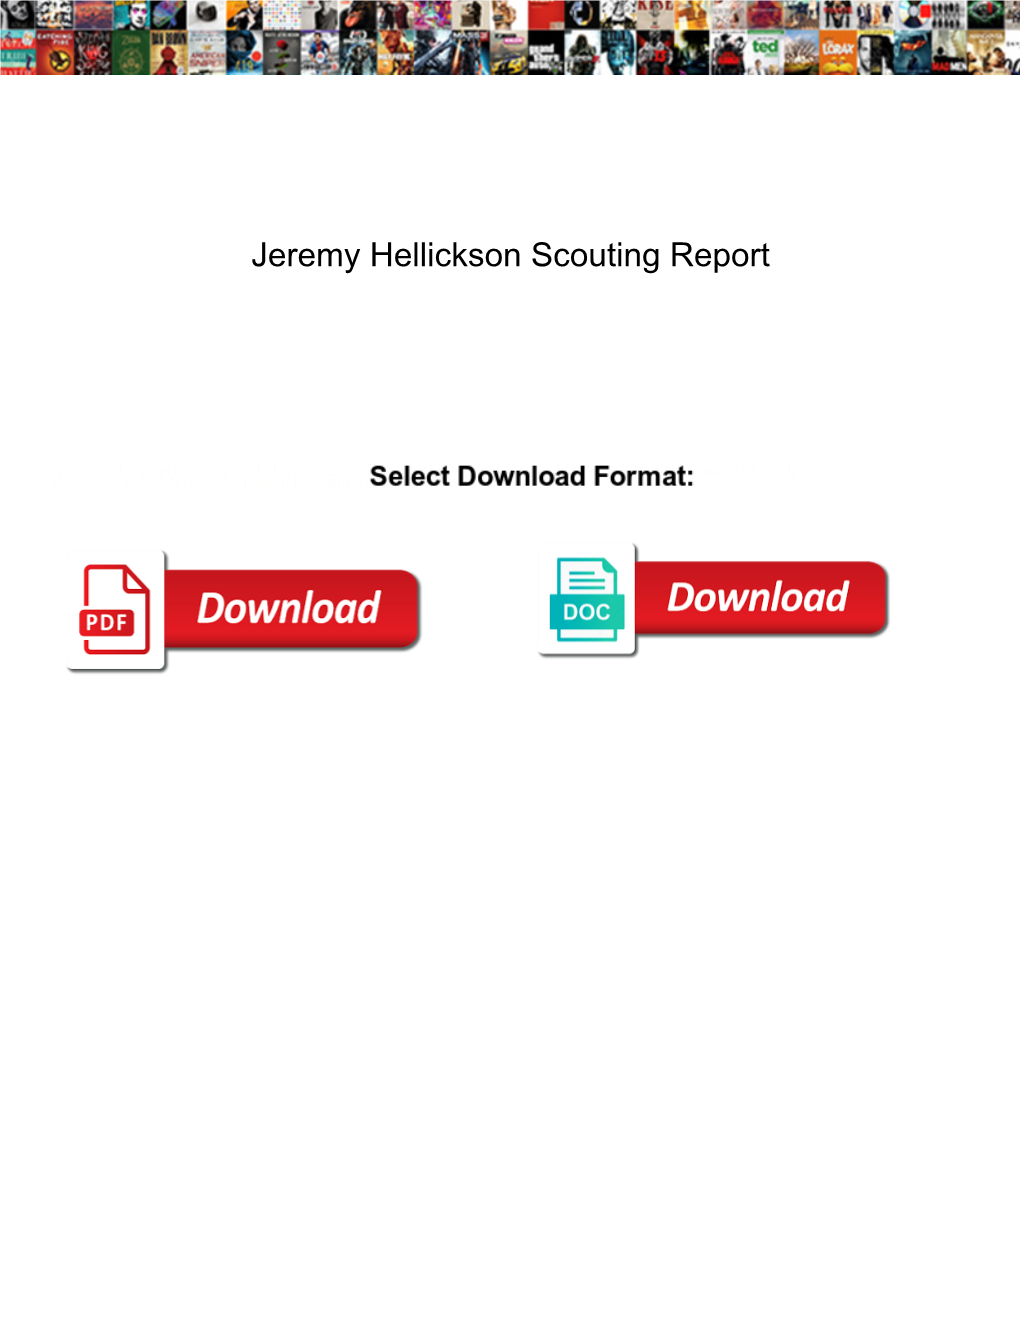 Jeremy Hellickson Scouting Report